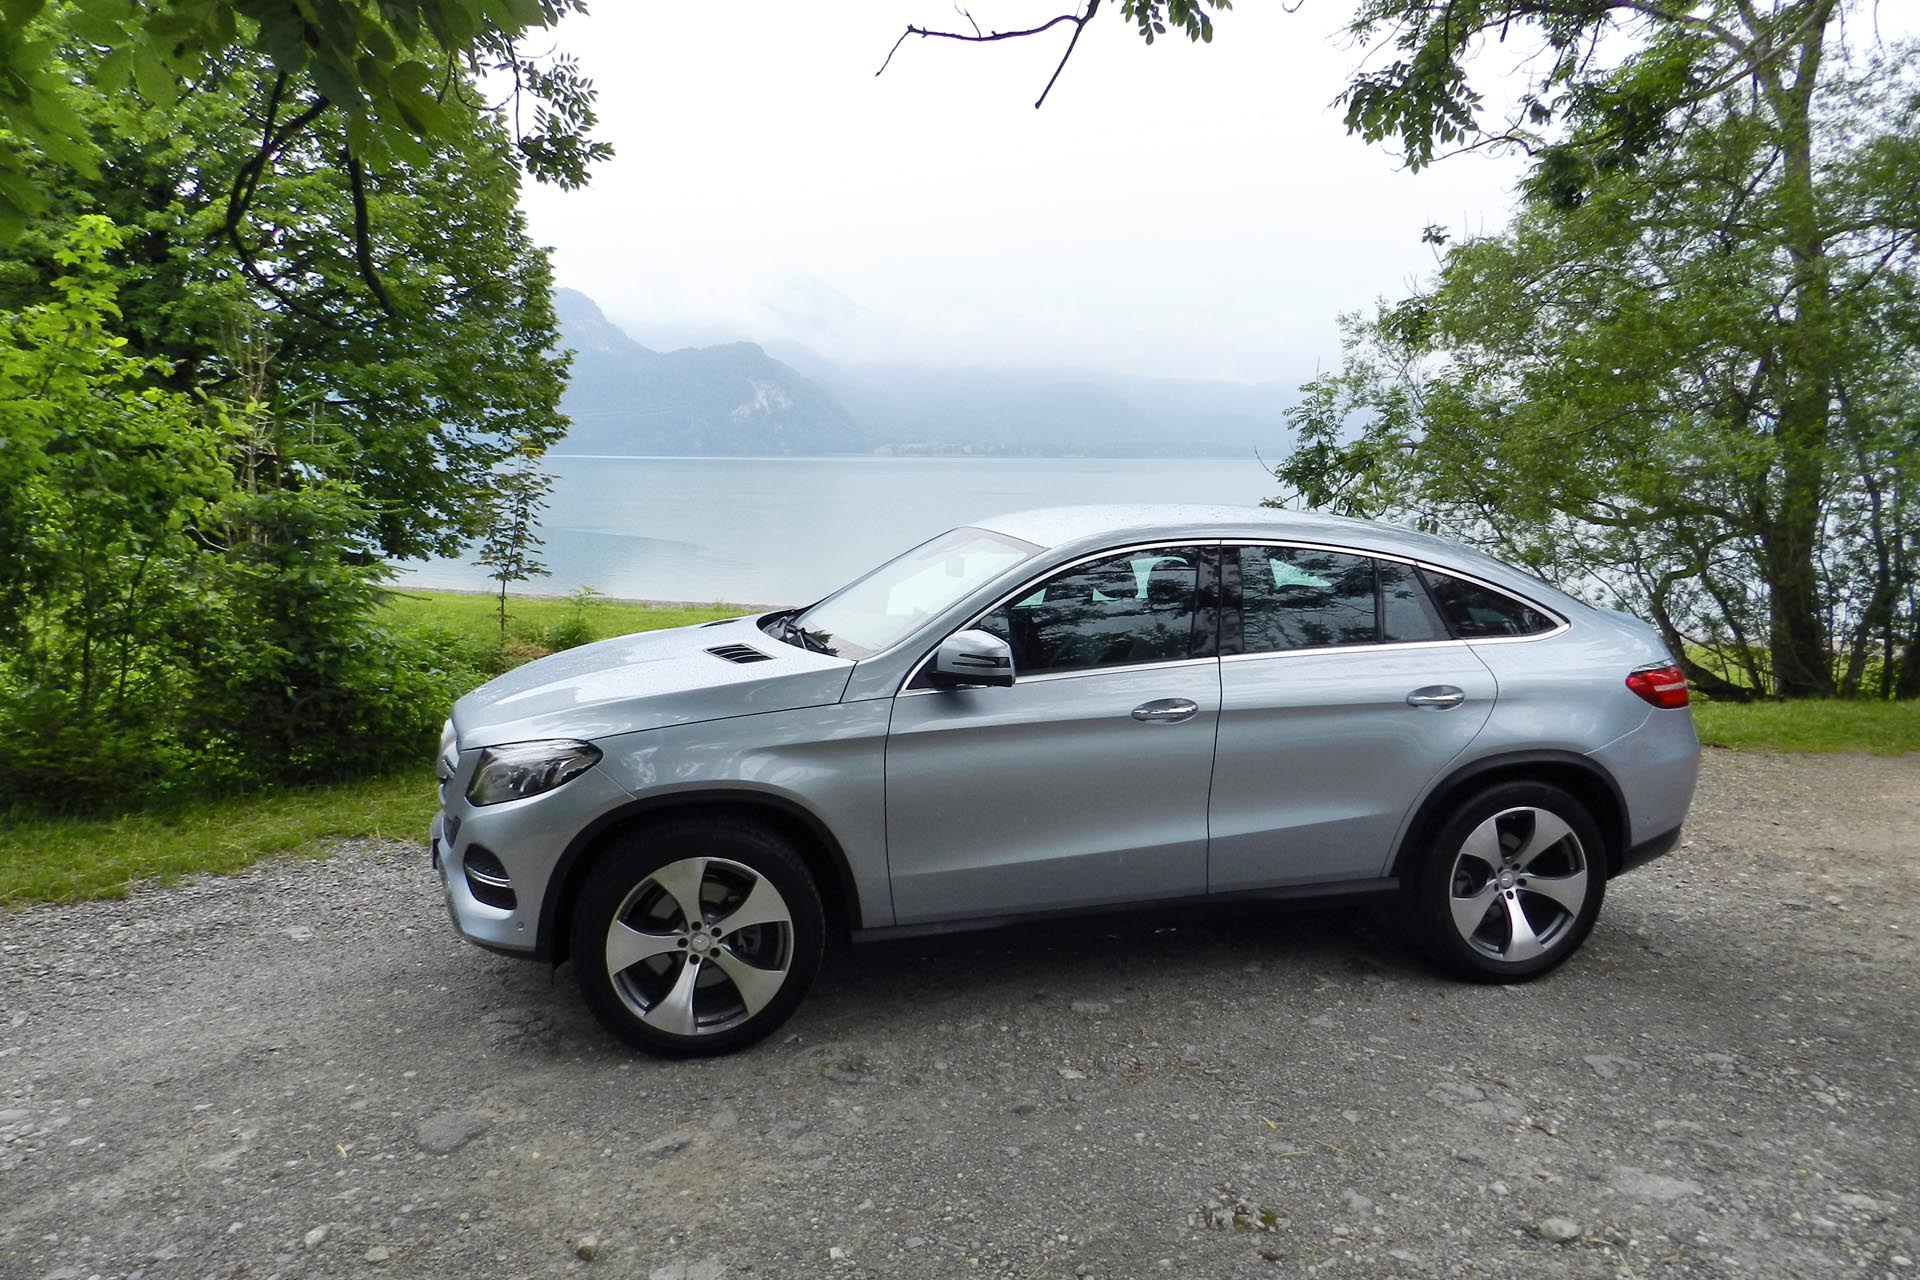 2016 Mercedes-Benz GLE pricing starts at $63,200 - Autos.ca